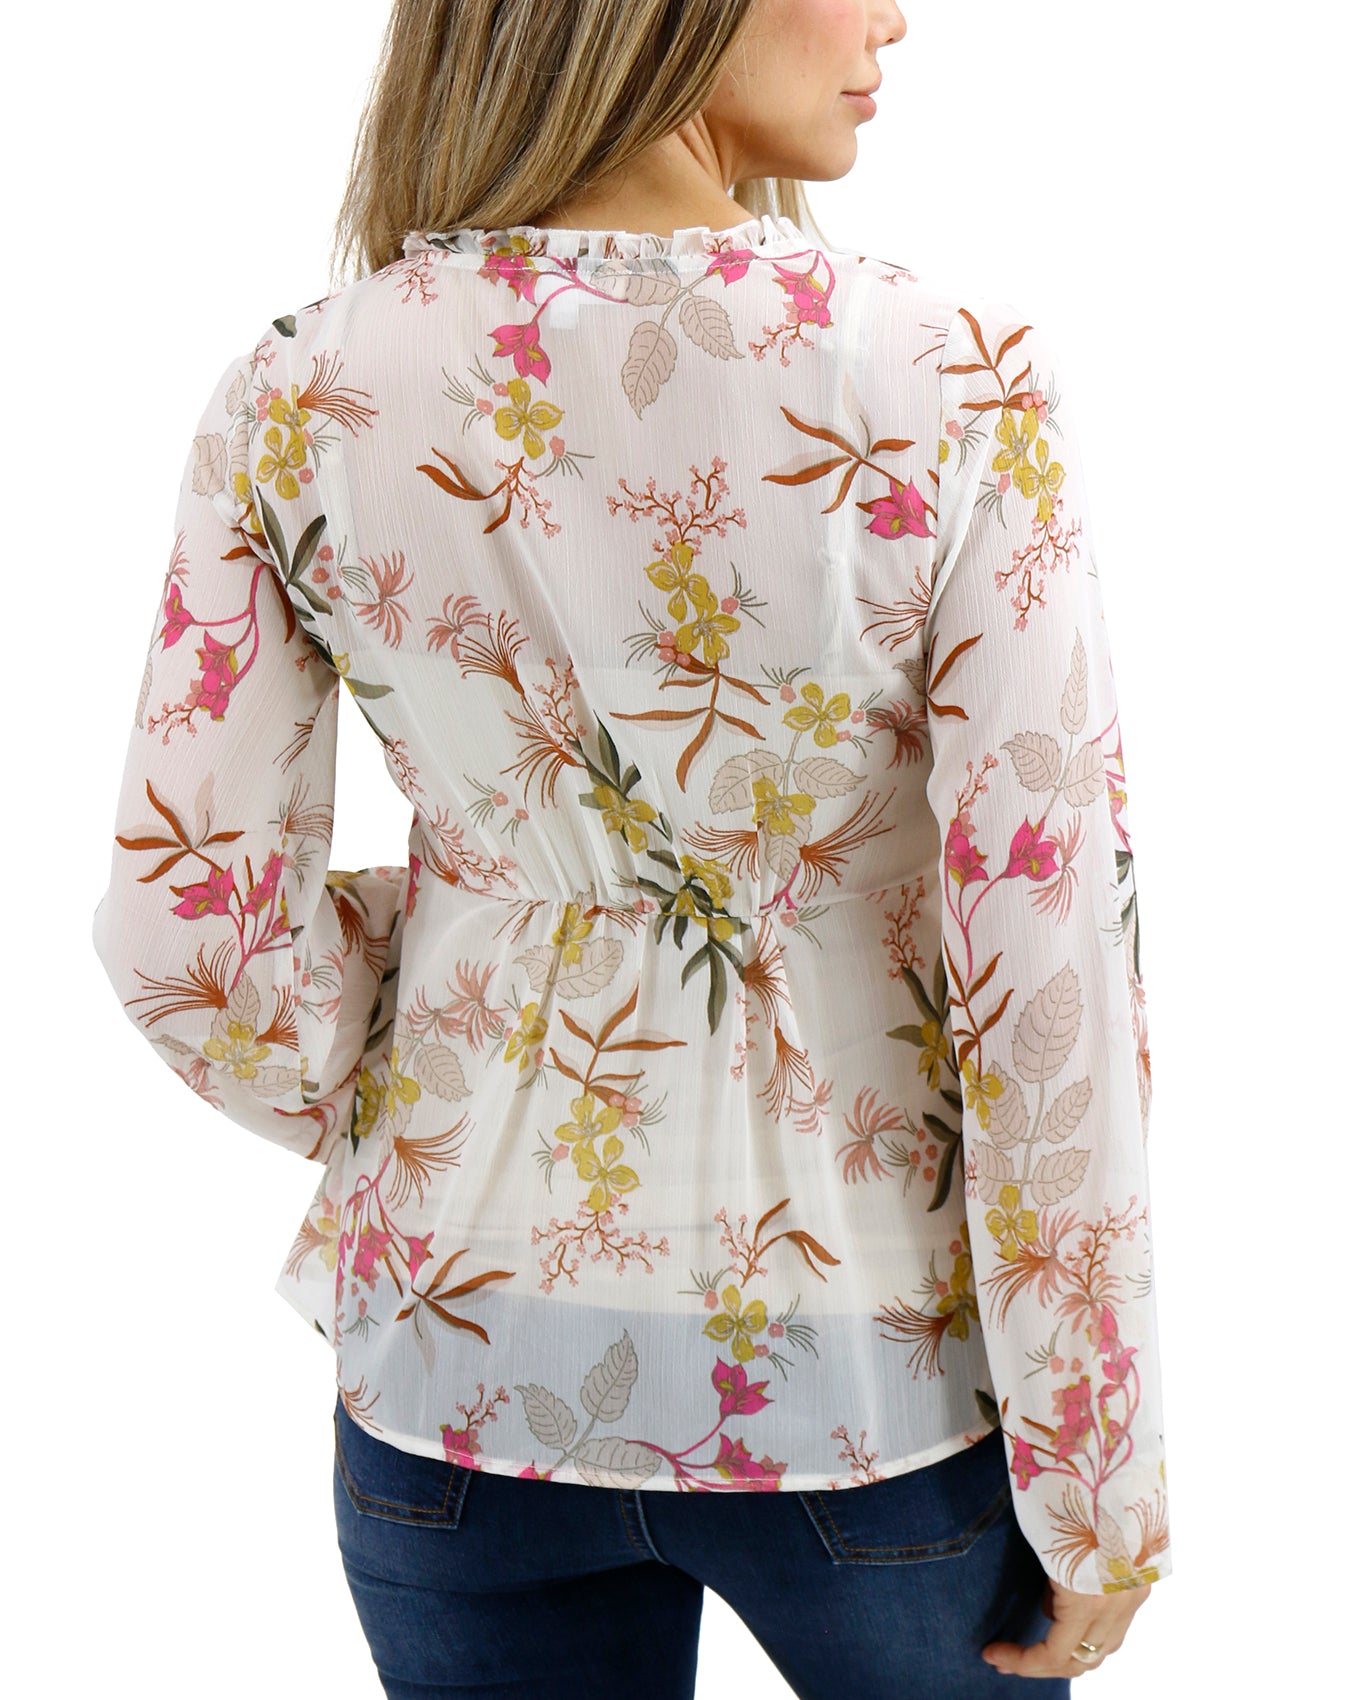 Back stock shot of Ivory Floral Whimsical Tie Front Blouse